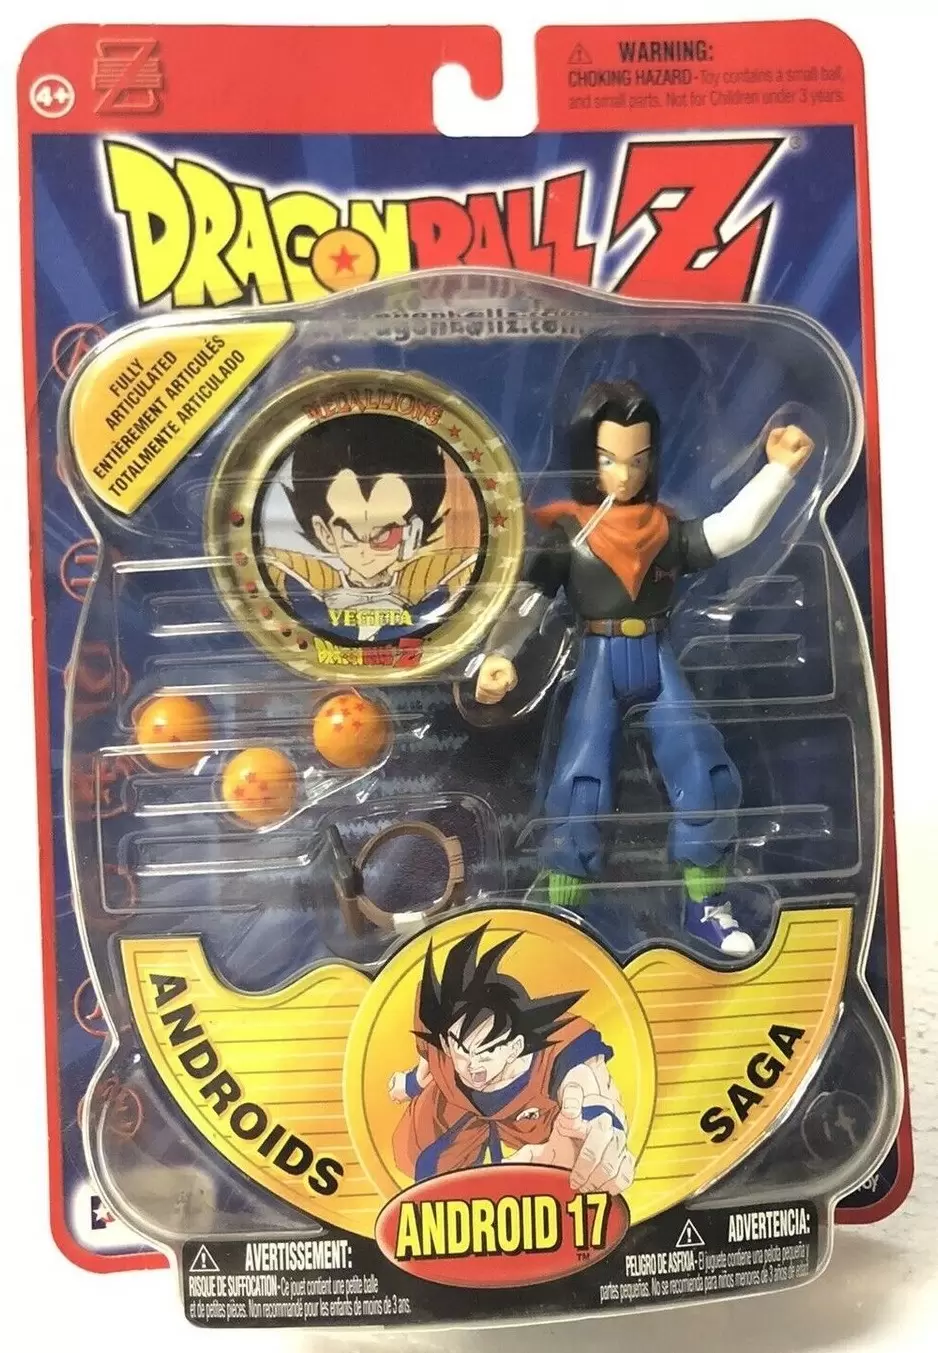 Irwin Toy - Androids Saga - Android 17